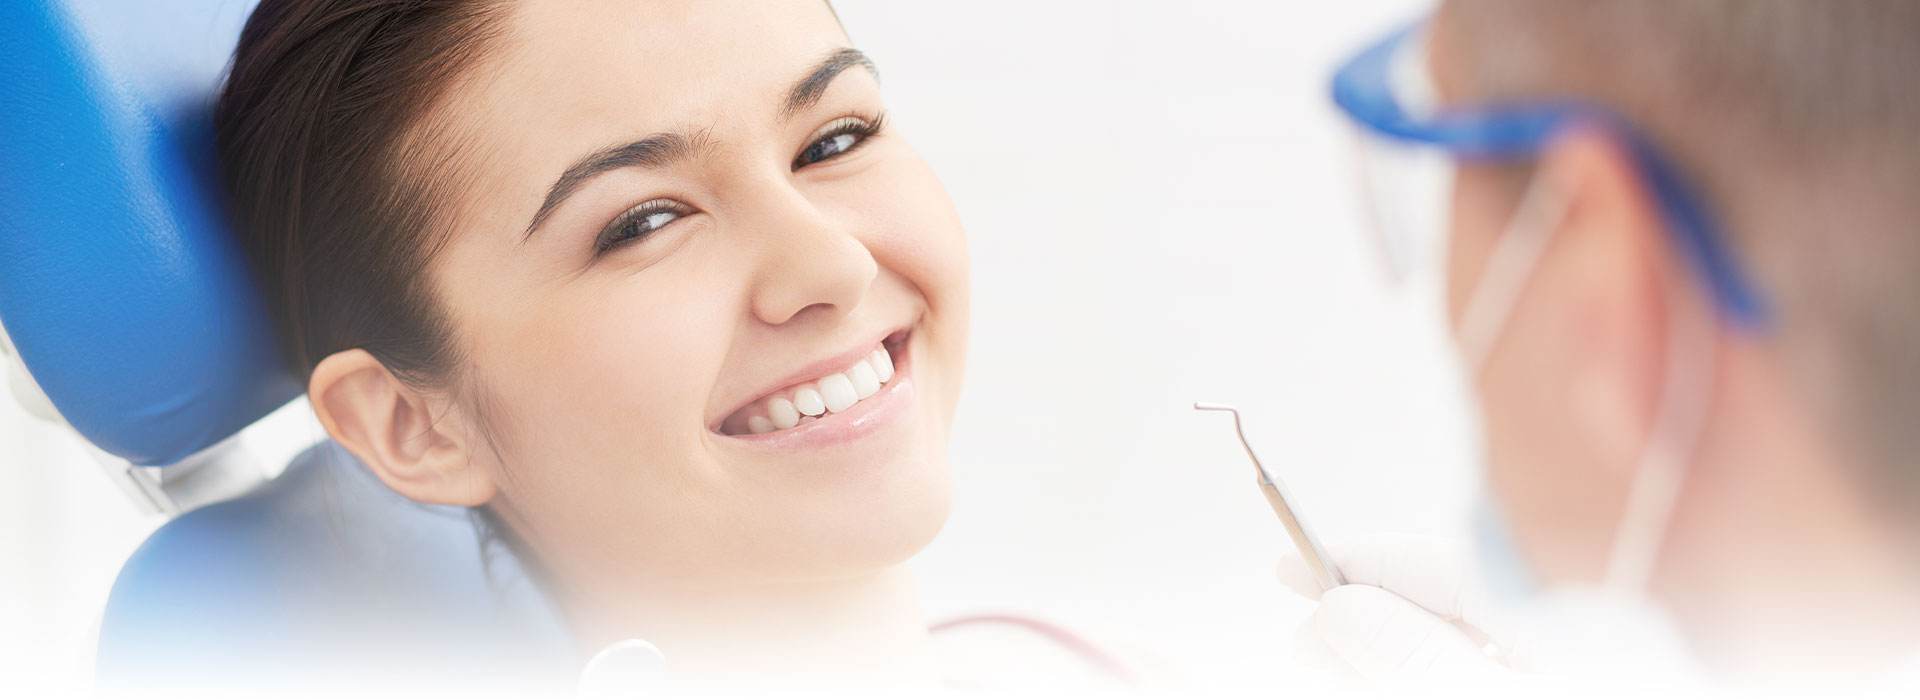 Woman with beautiful smile having dental check up at the crestwood dental group